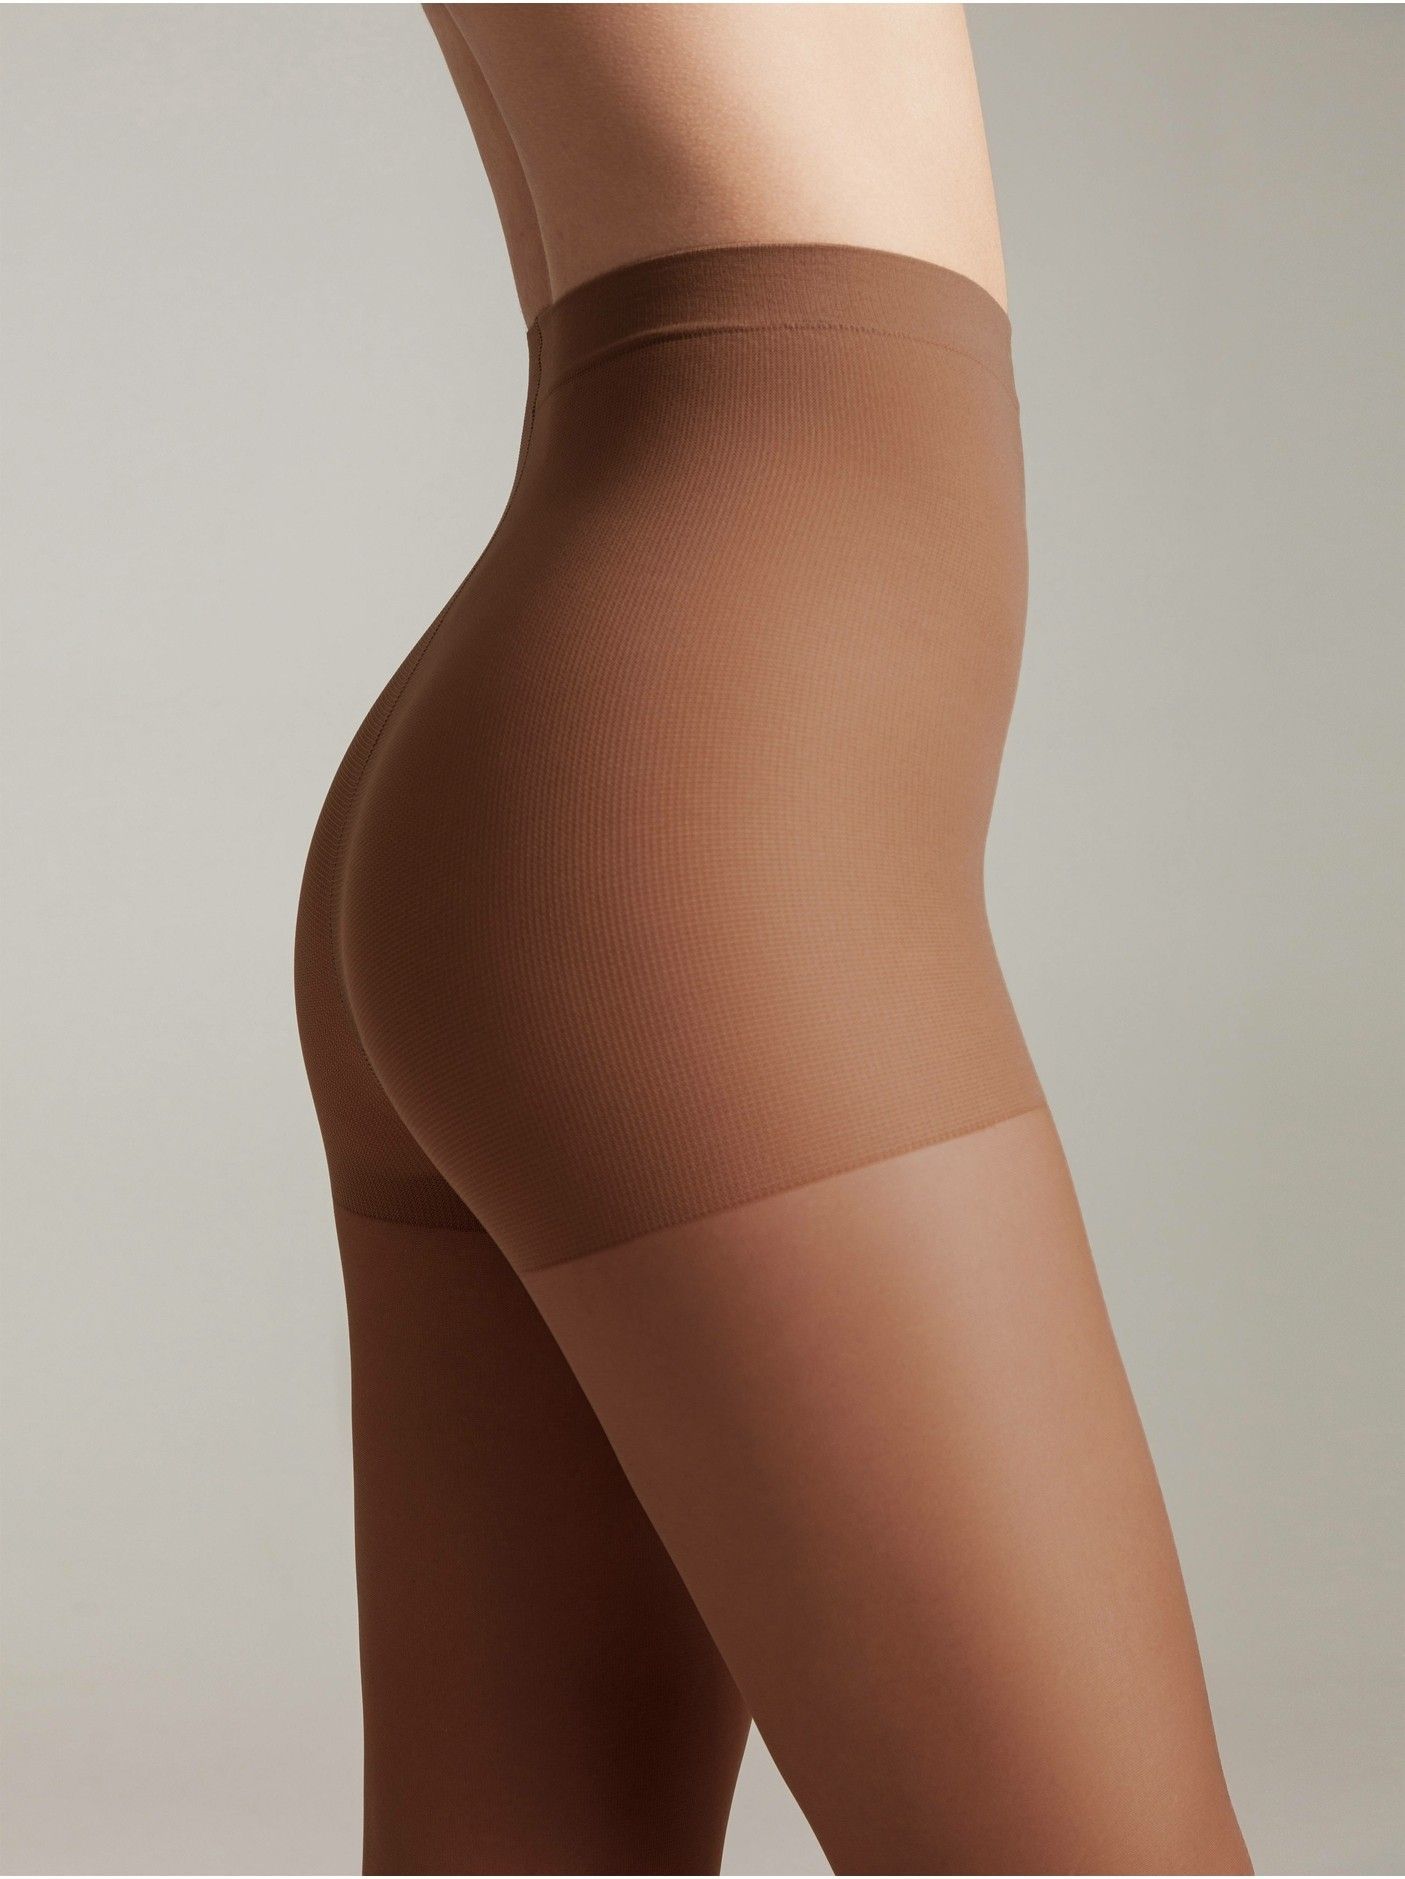 TIGHTS FOR SENSITIVE SKIN WITH A SHAPING EFFECT ACTIVE SOFT 20 Lycra® -  Official online store Conte